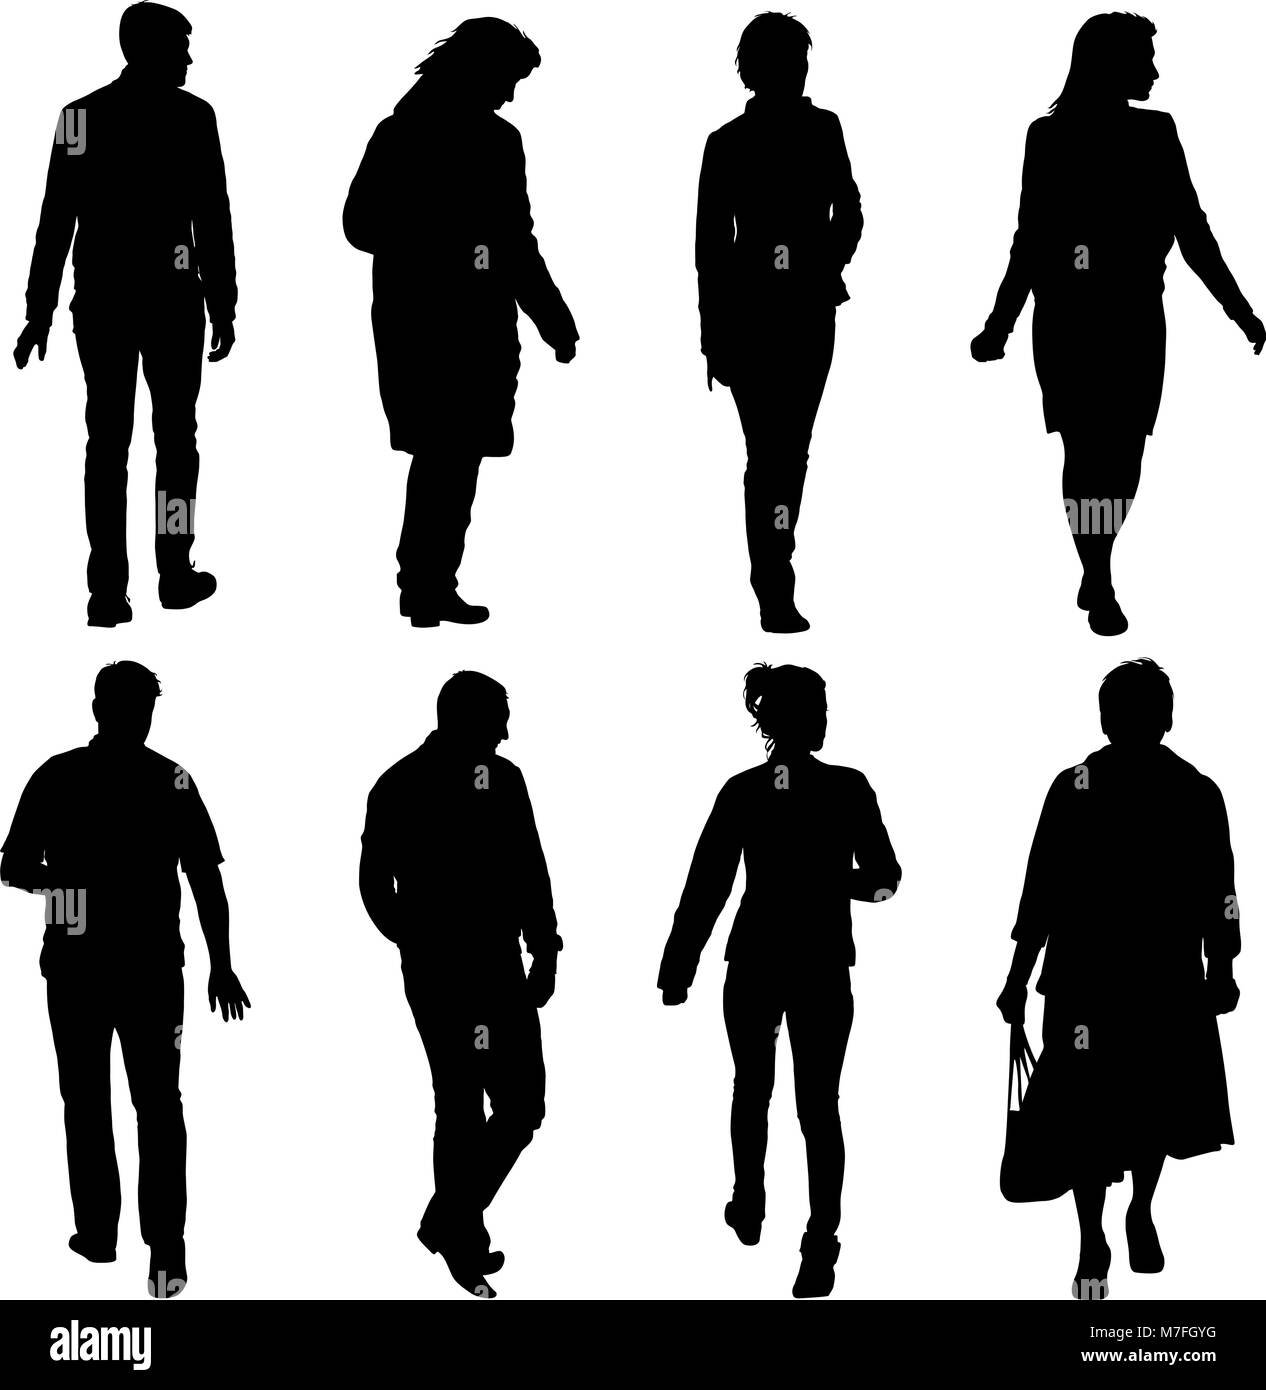 Black silhouette group of people standing in various poses Stock Vector